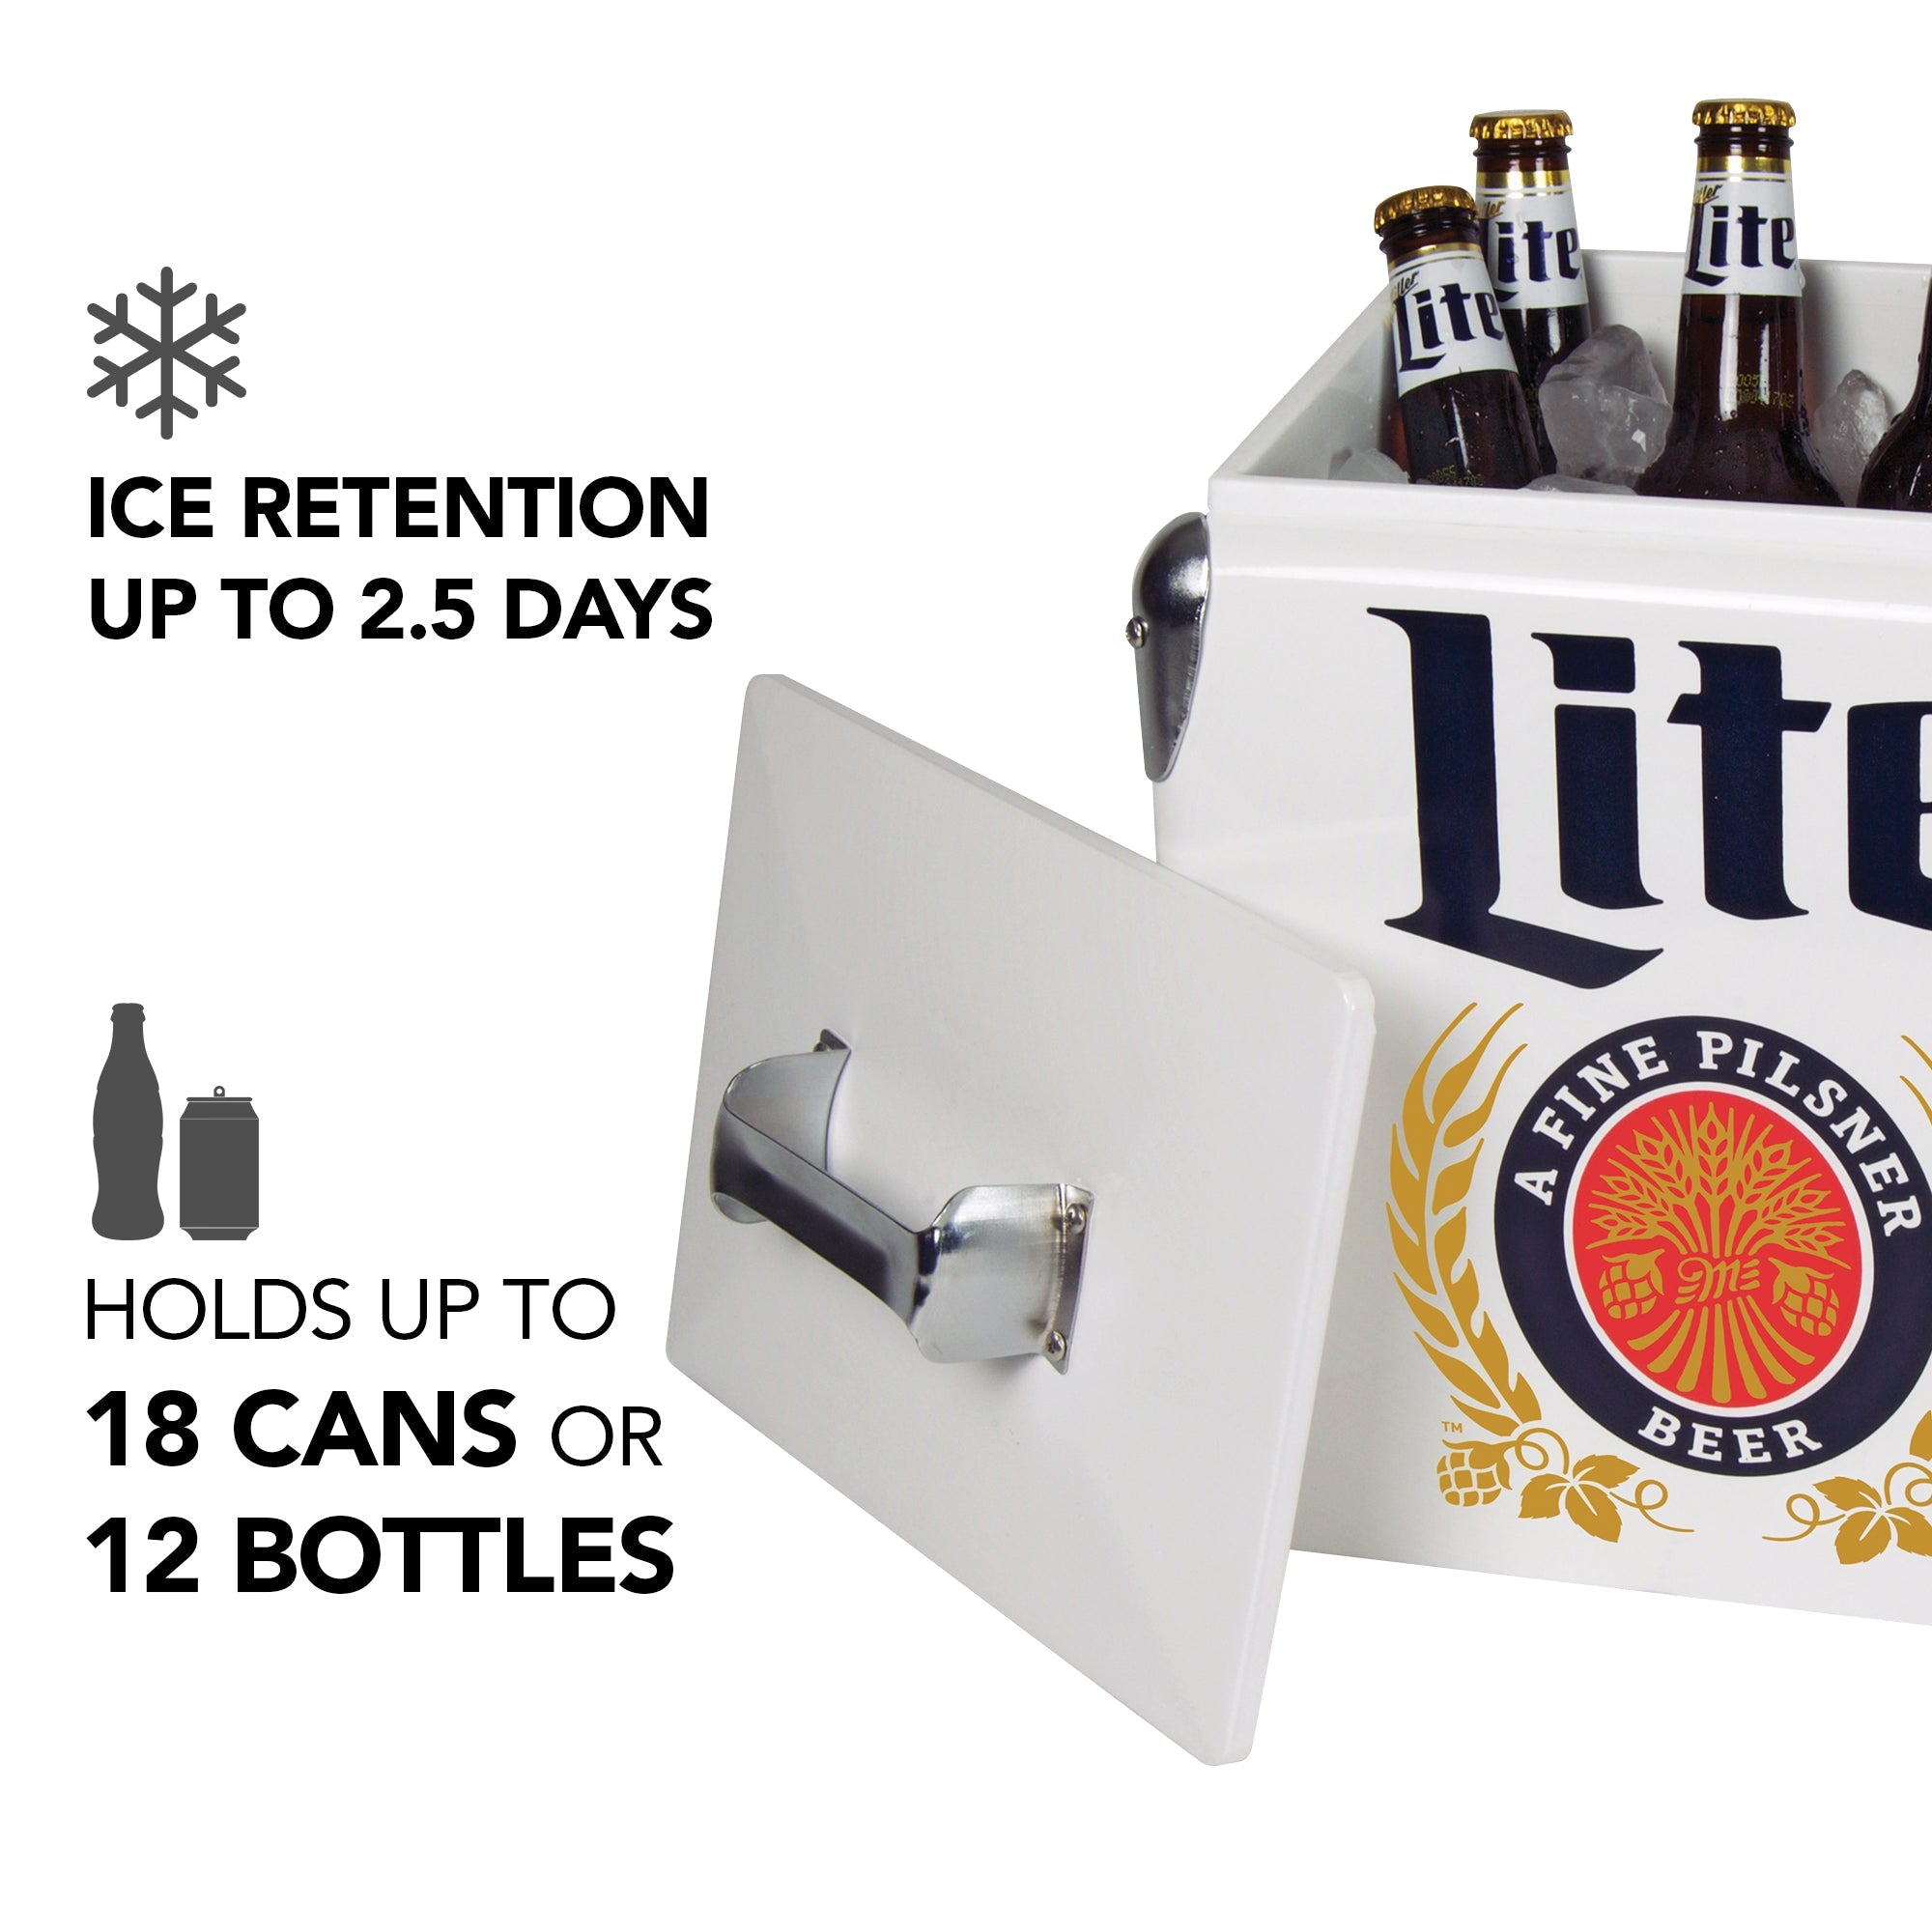 Product shot of Miller Lite 13L retro ice chest, open with ice and bottles of Miller Lite beer inside and the lid leaning against it, on a white background. Text and icons to the left describe: Ice retention up to 2.5 days; holds up to 18 cans or 12 bottles